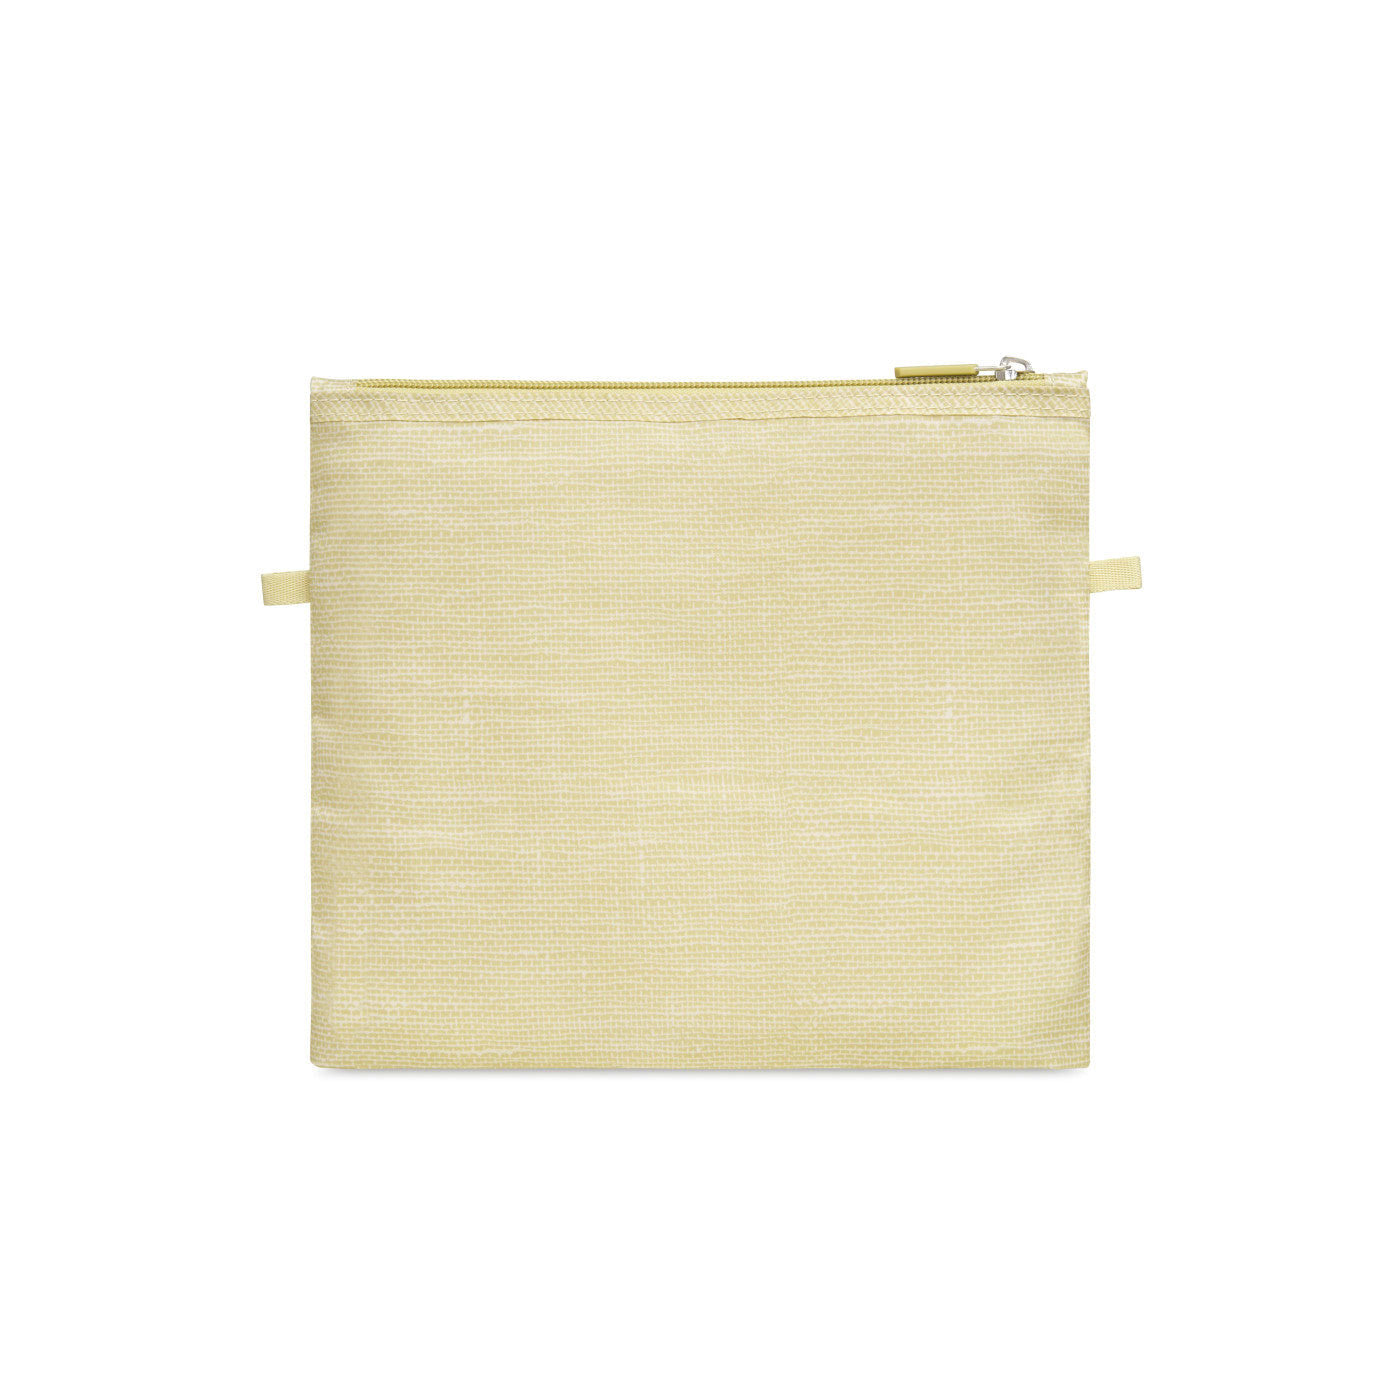 RuMe Recycled Pouch, Burlap